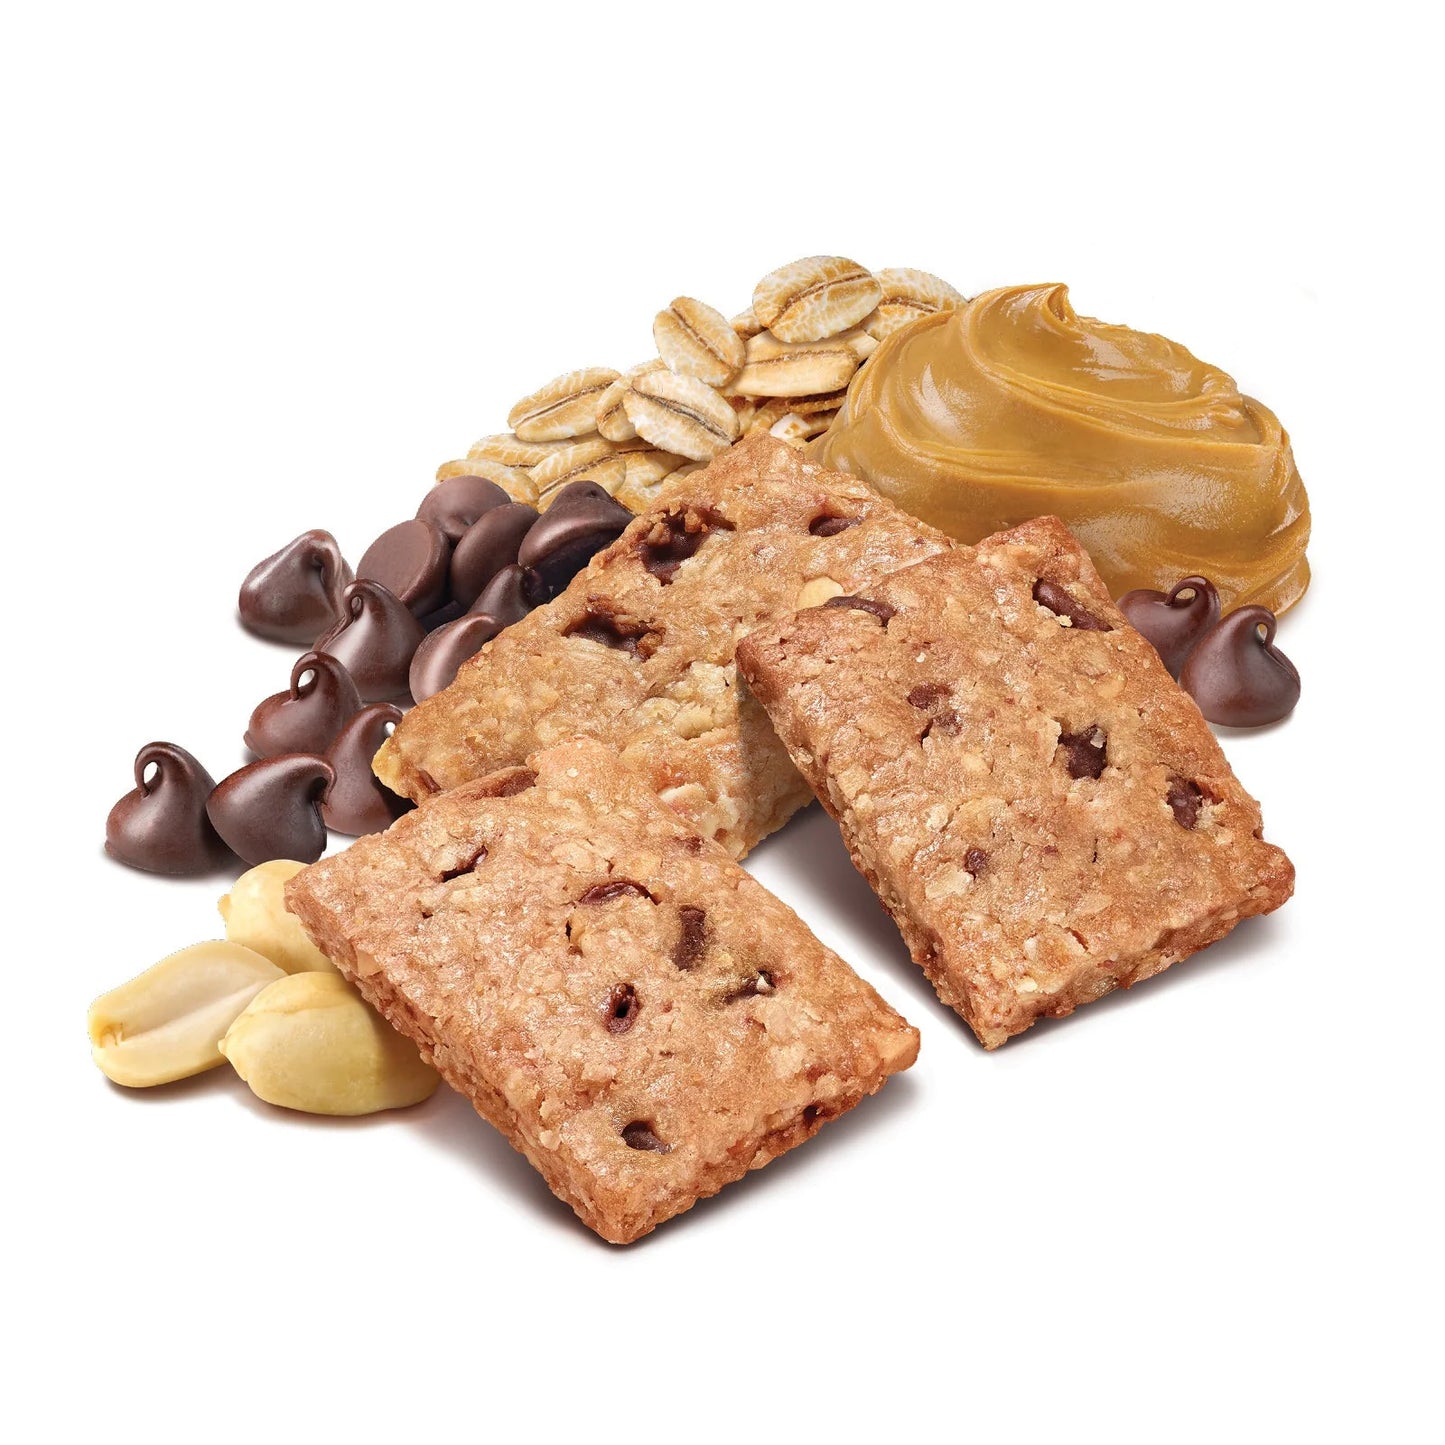 ProBar THINS - Peanut Butter Chocolate Chip